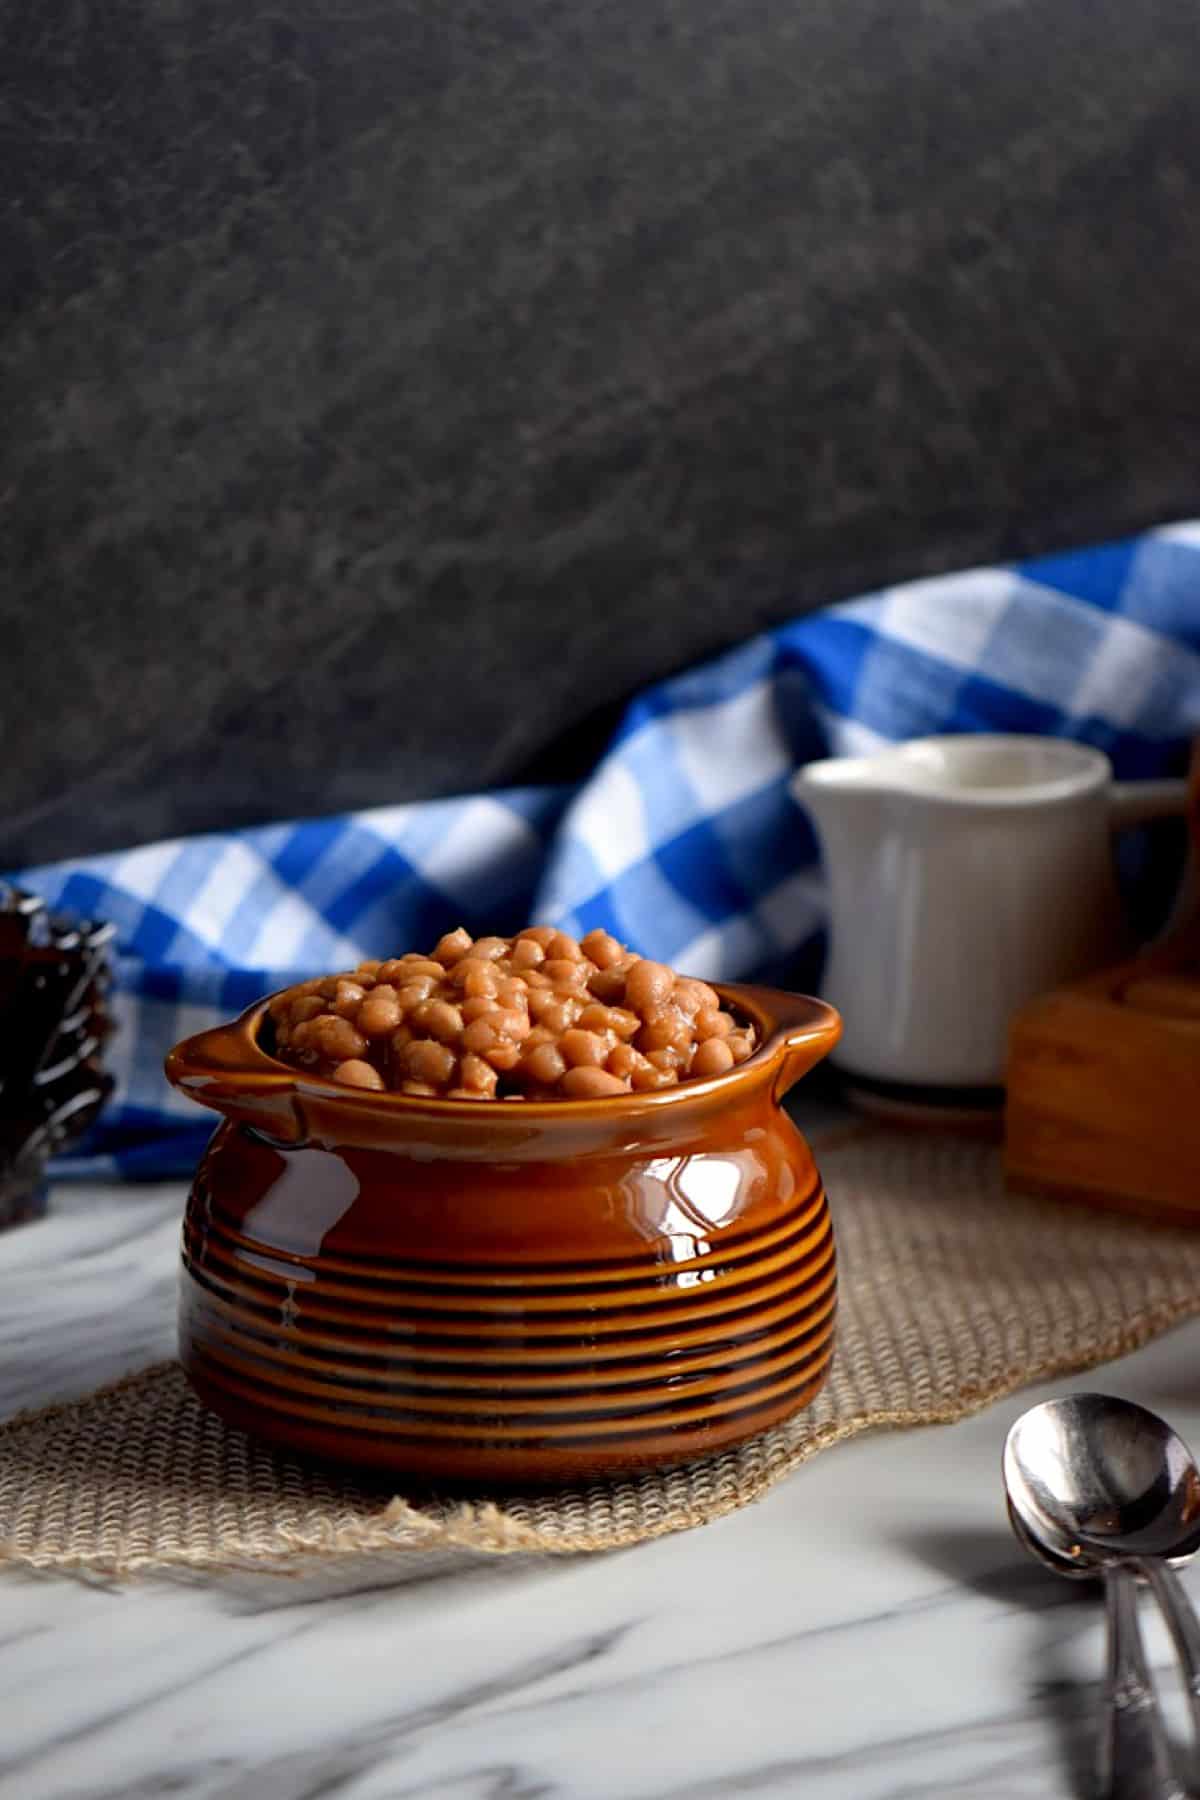 Homemade baked beans in a brown ceramic pot.